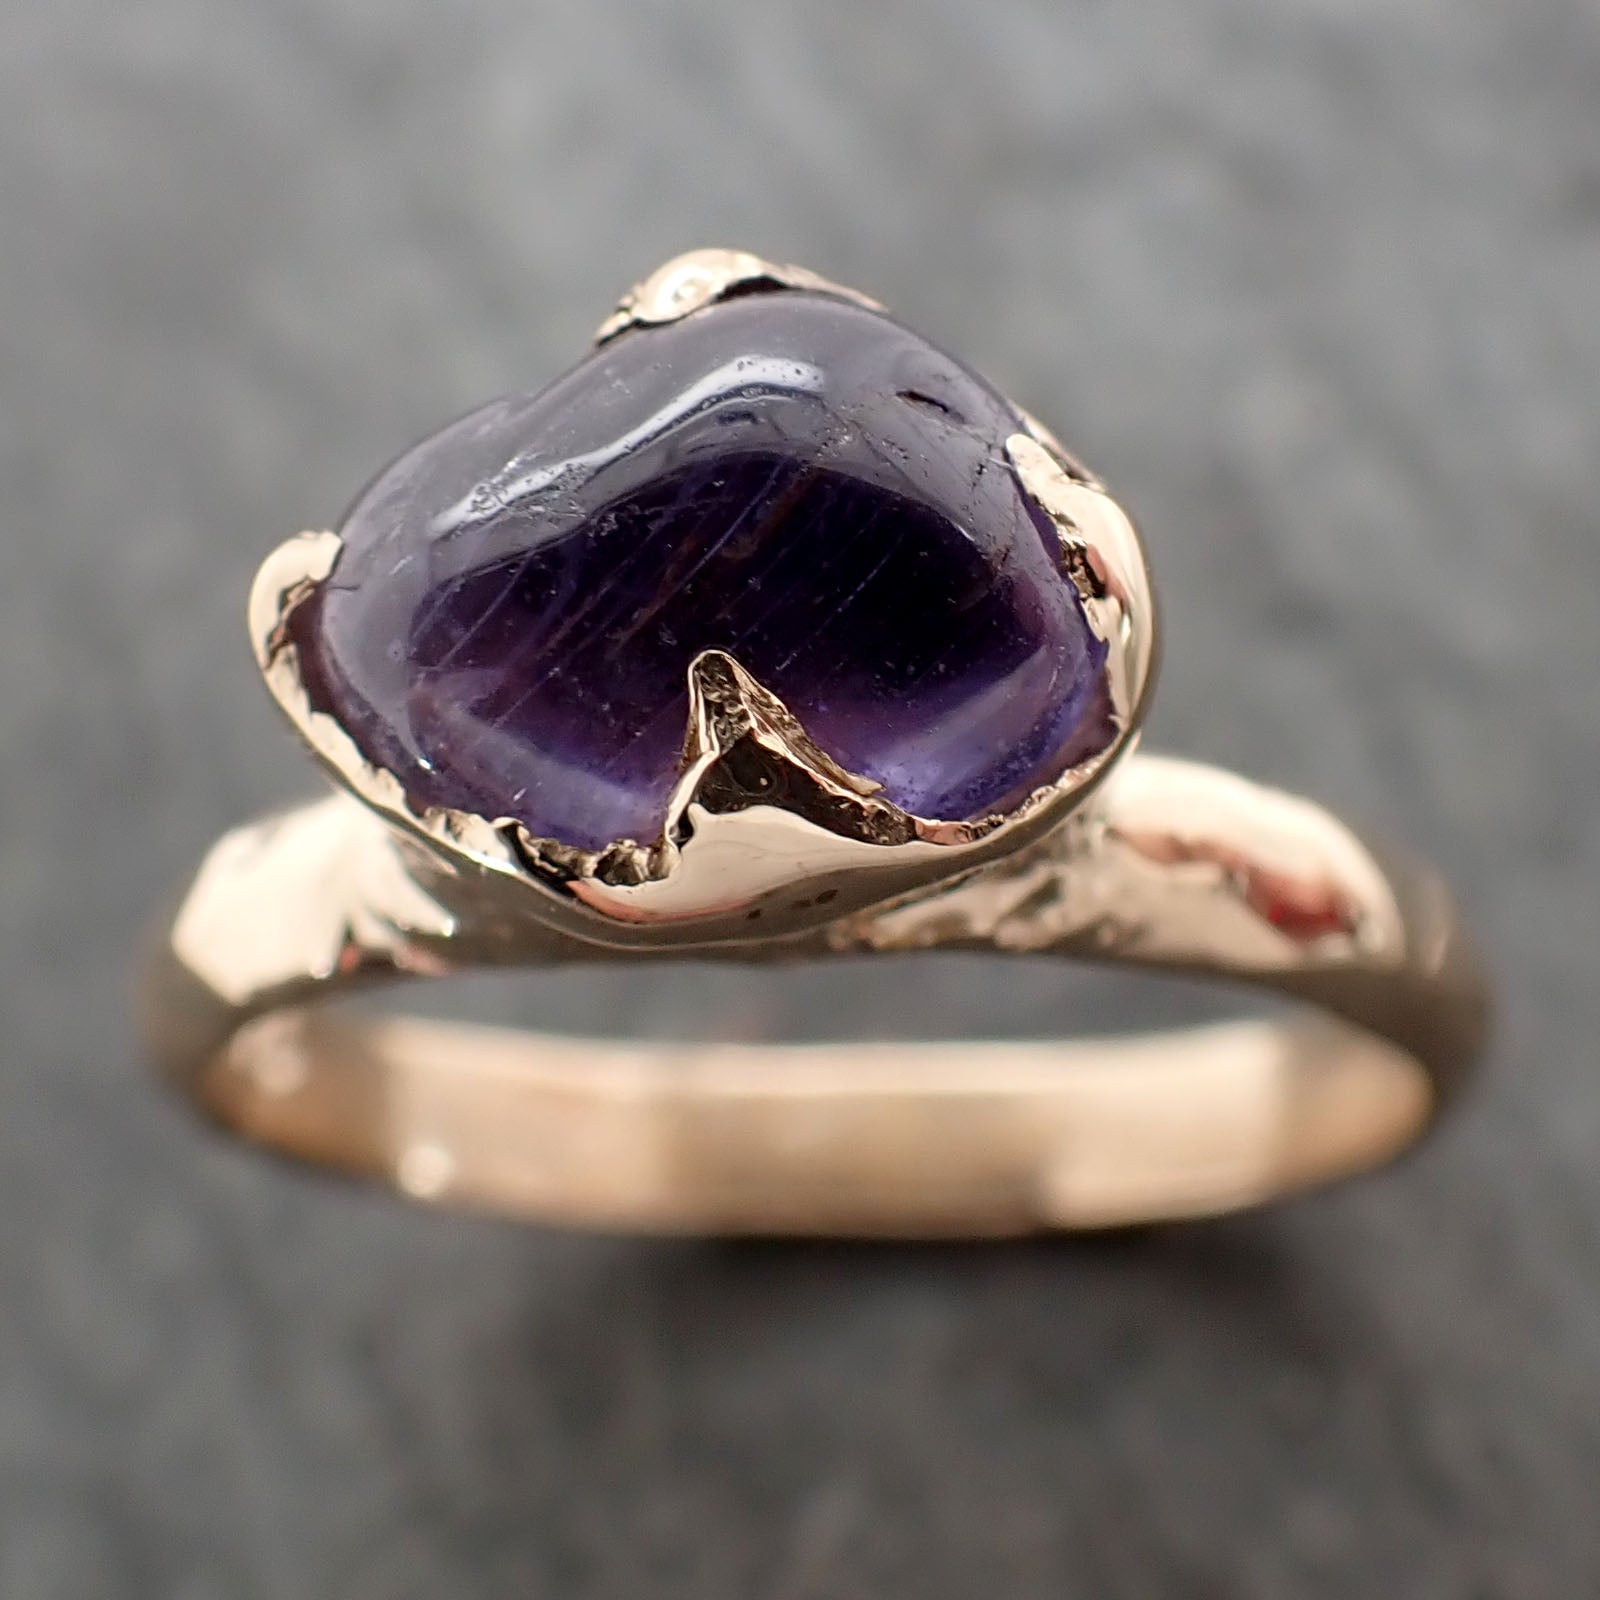 Sapphire tumbled 14k yellow gold Solitaire purple polished gemstone ring 2844